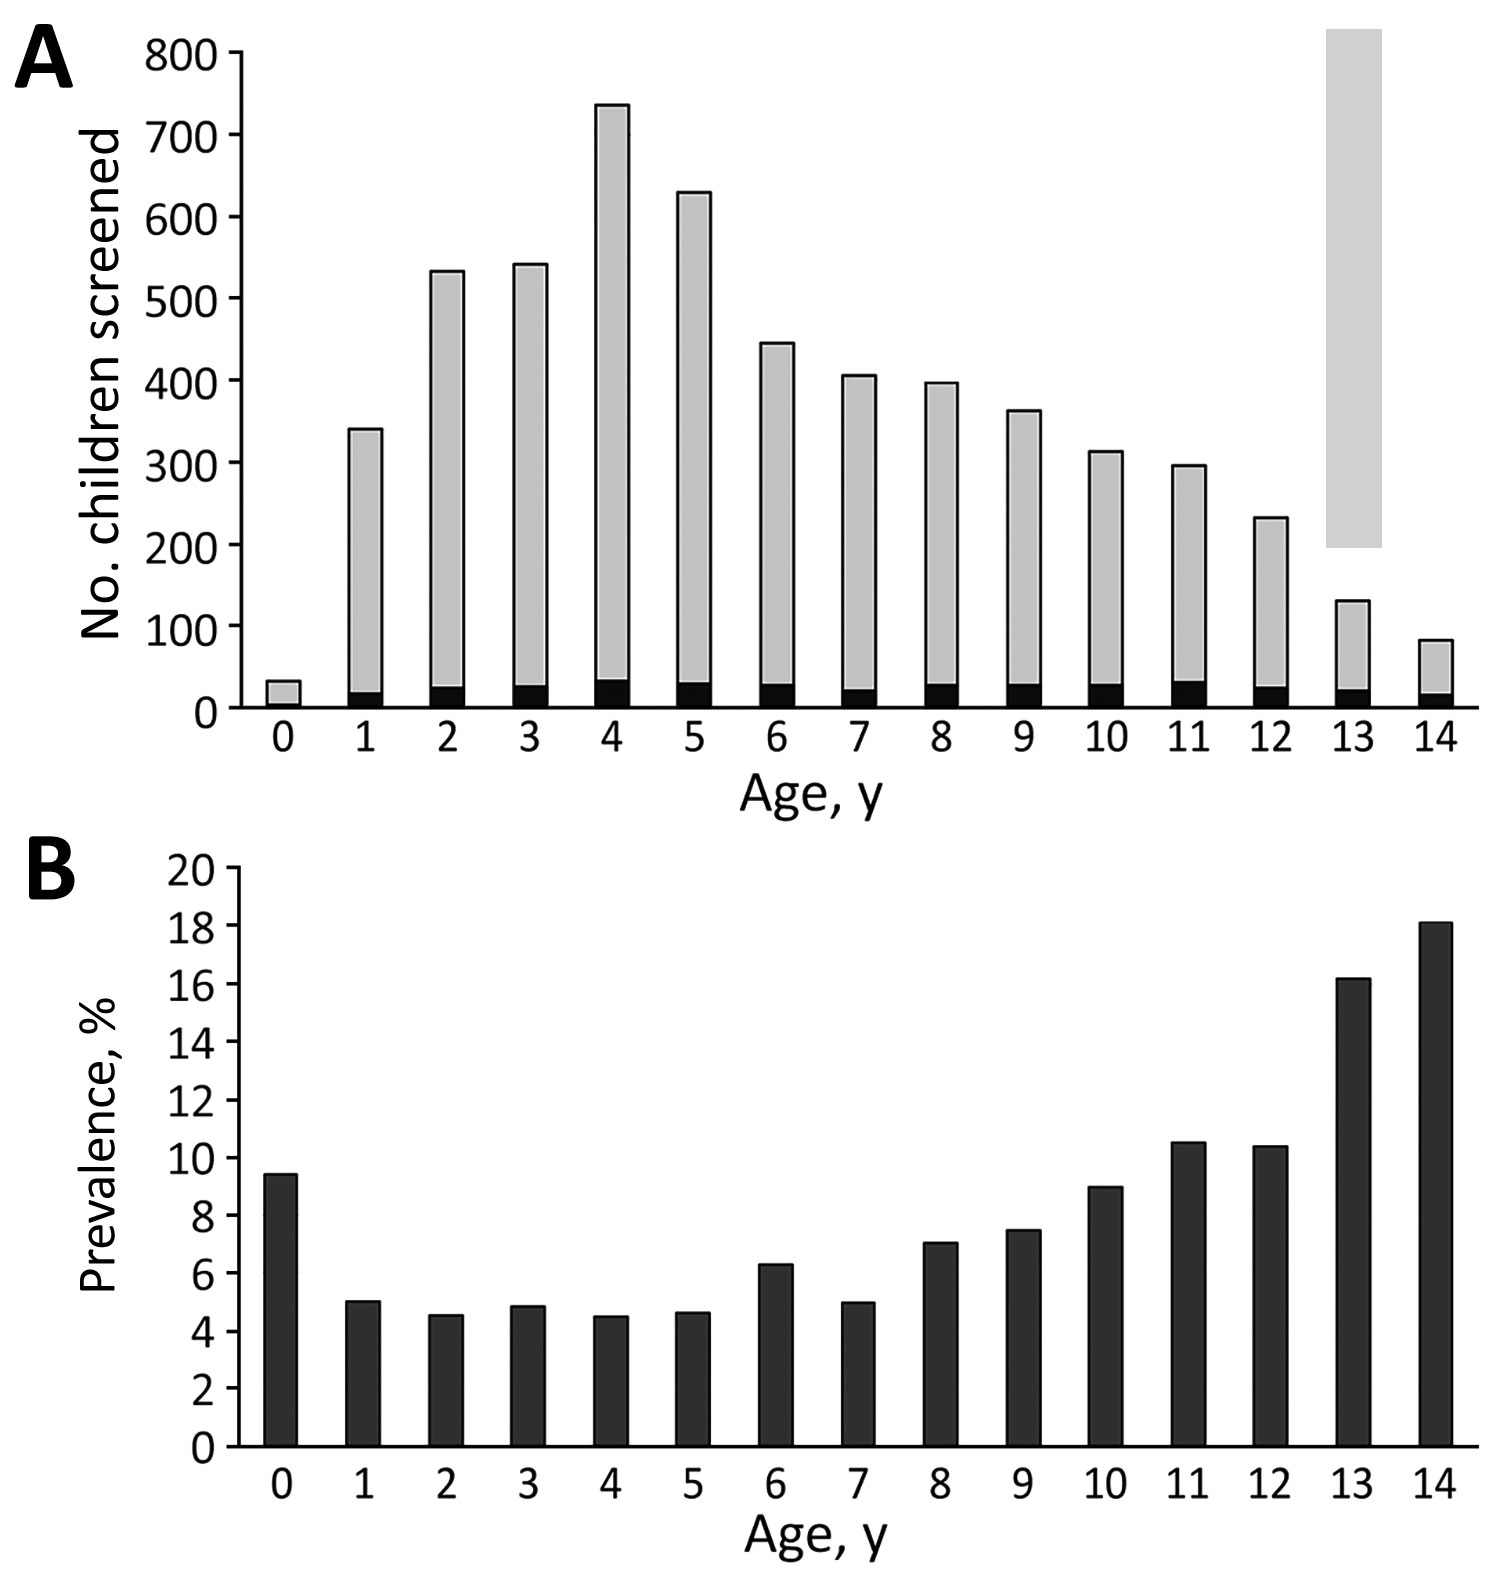 Distribution of patients by age in study of tuberculosis in children in areas affected by 2013 natural disasters, Bohol, Philippines. A) Number of children who screened positive by TST; B) prevalence of TST positivity. Black bars, TST positive; gray bars, TST negative. TST, tuberculin skin test.